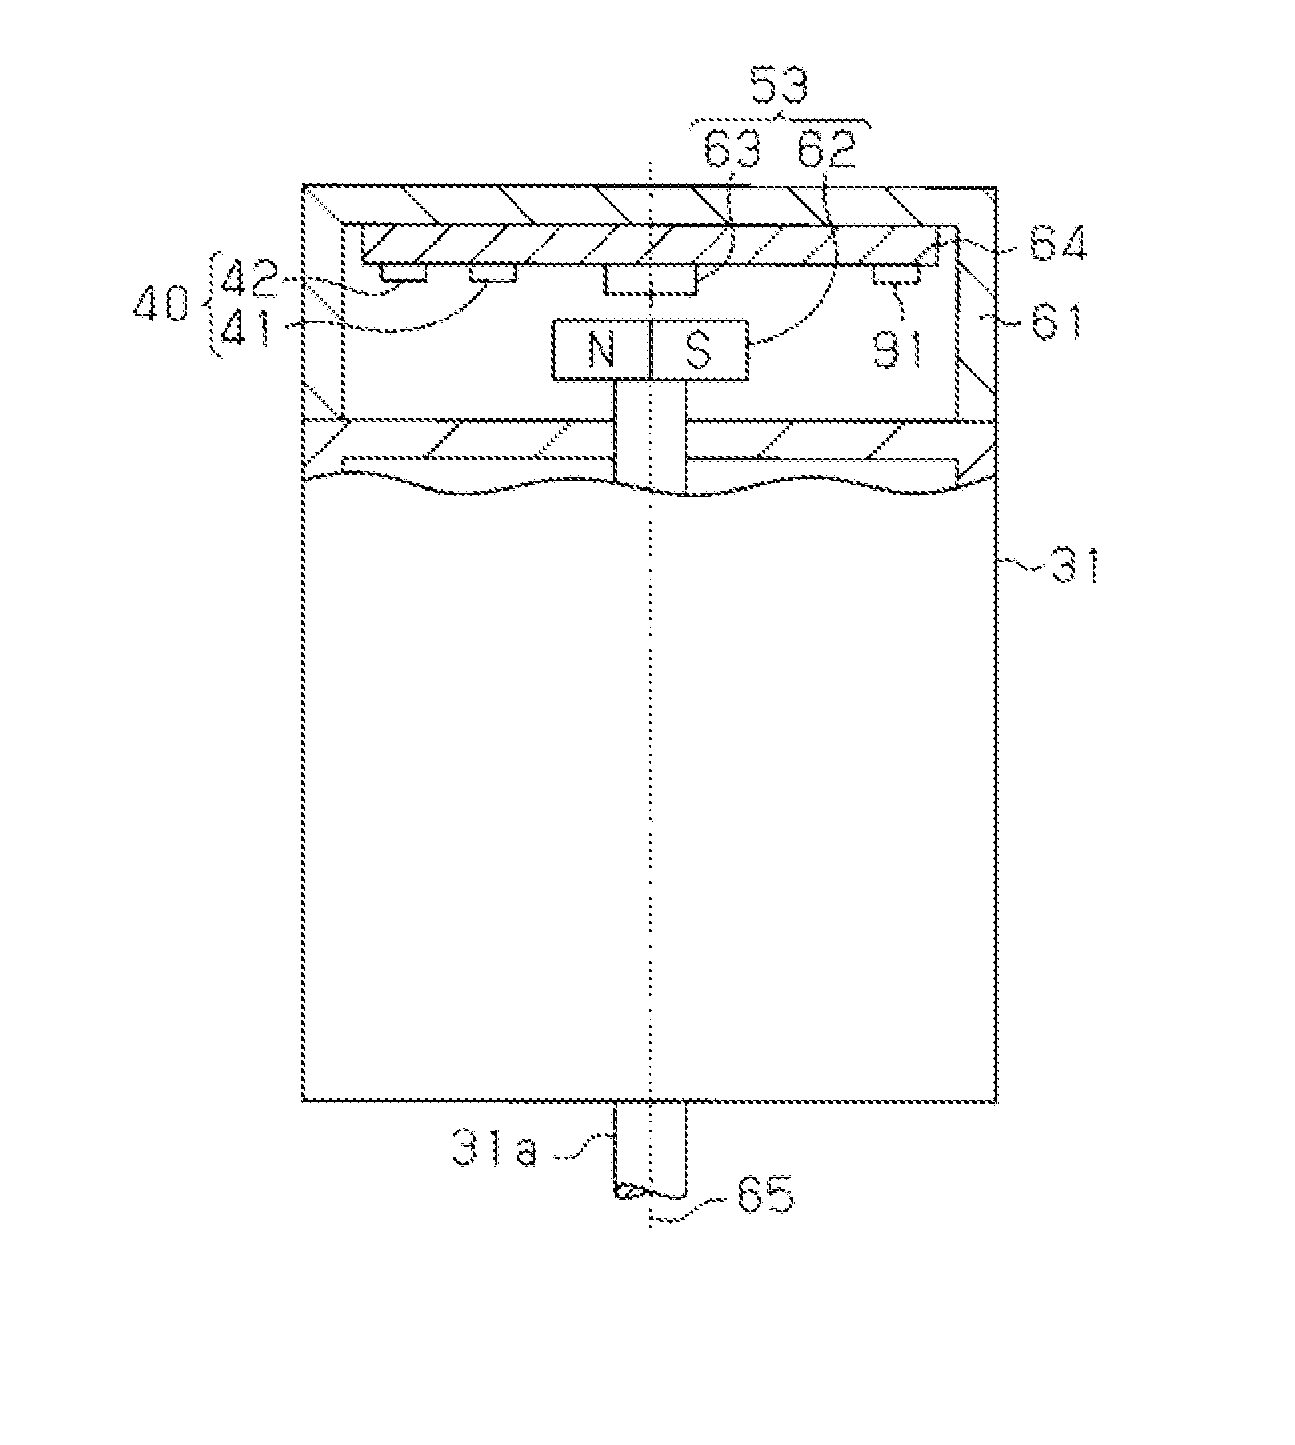 Abnormality detection system for rotation angle sensor